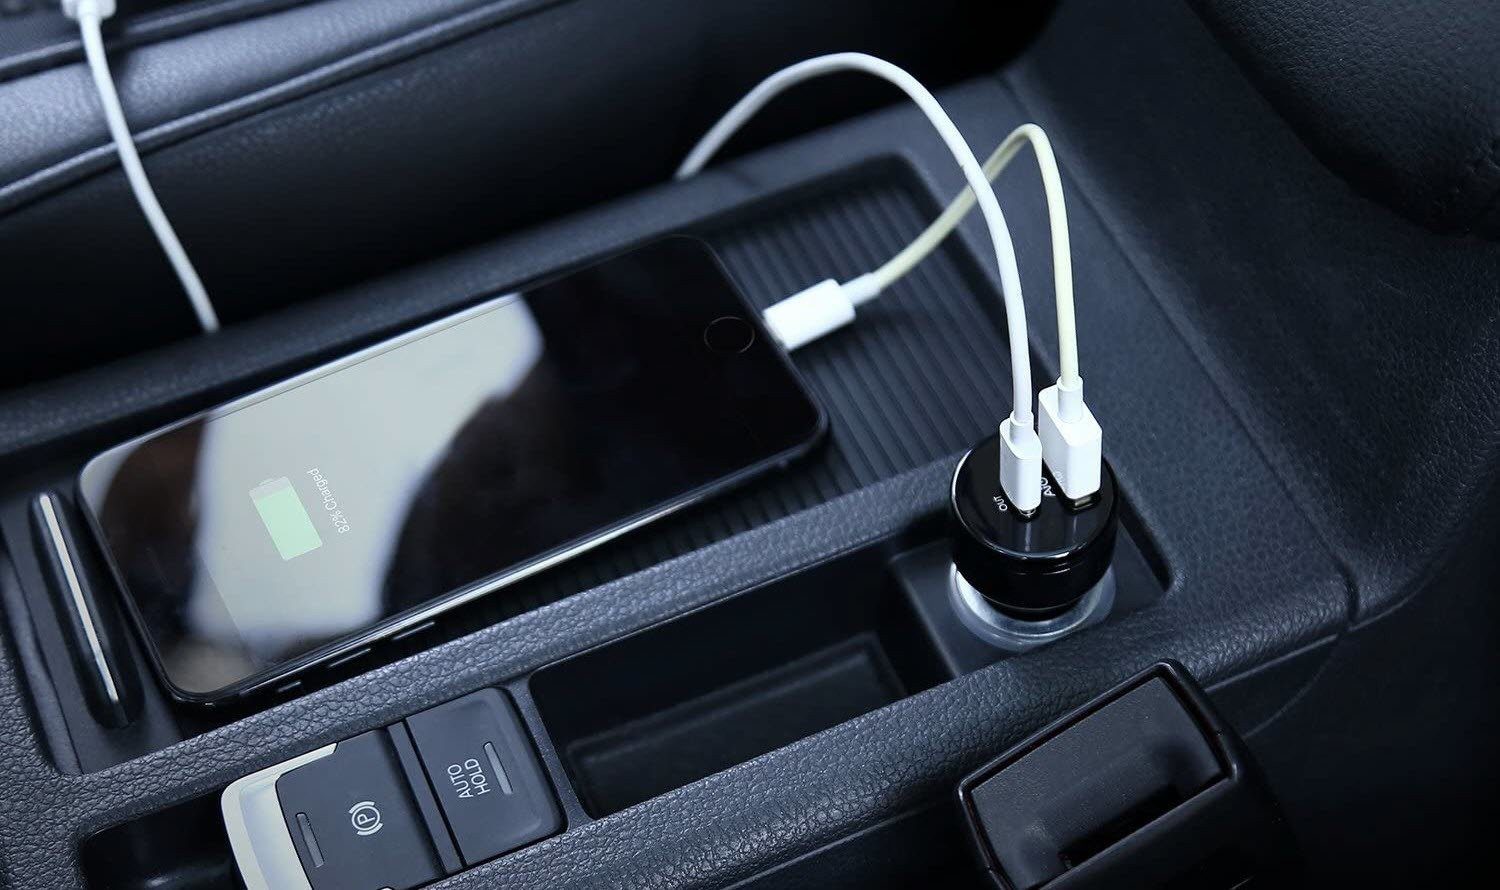 connected to car USB port